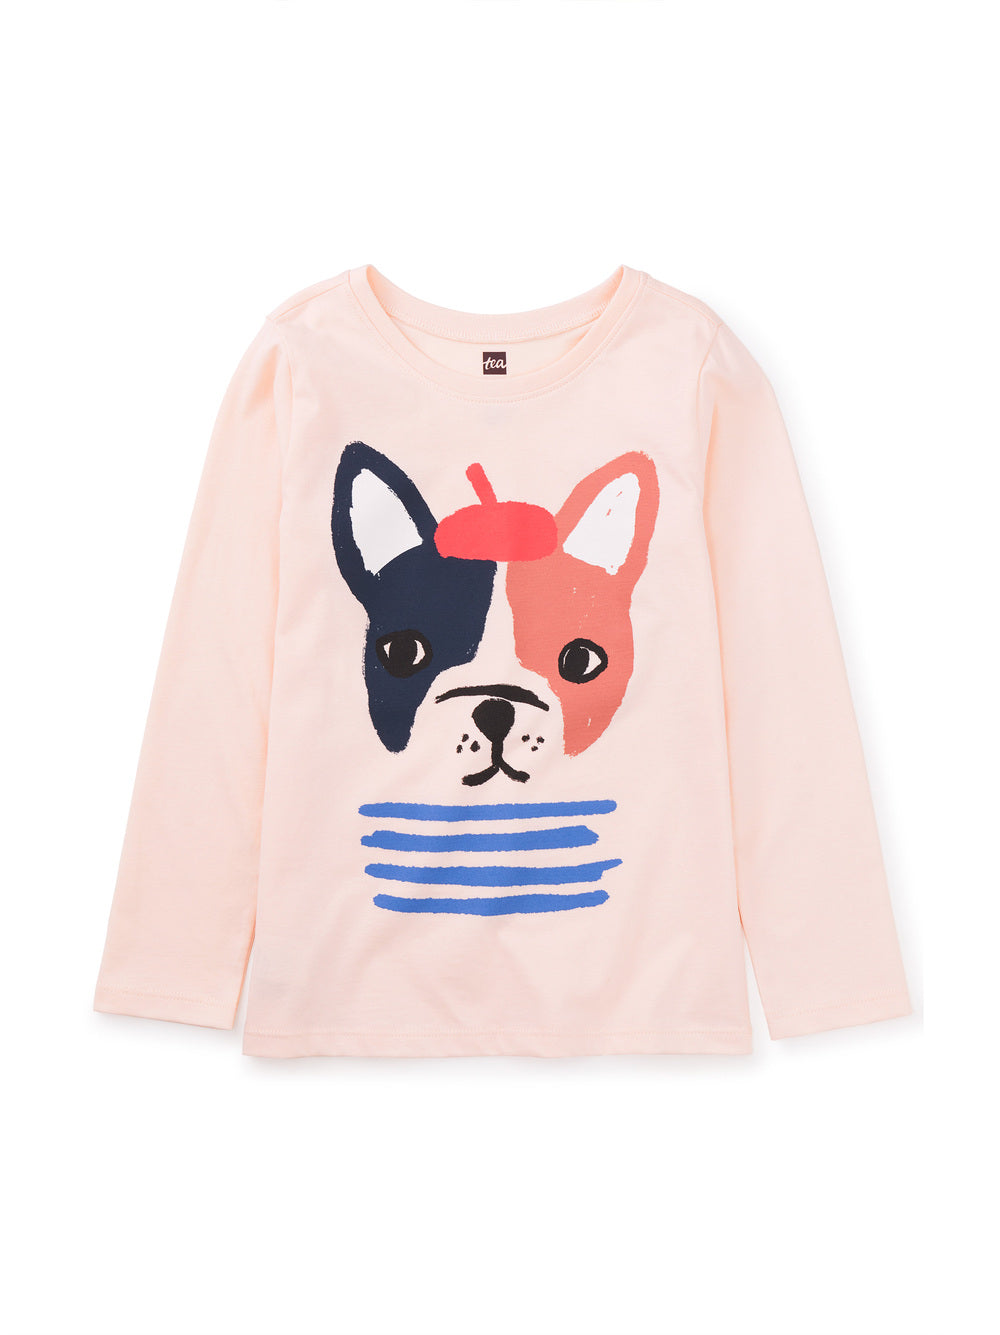 Tea Collection Long Sleeve Graphic Tee - Very French Bulldog